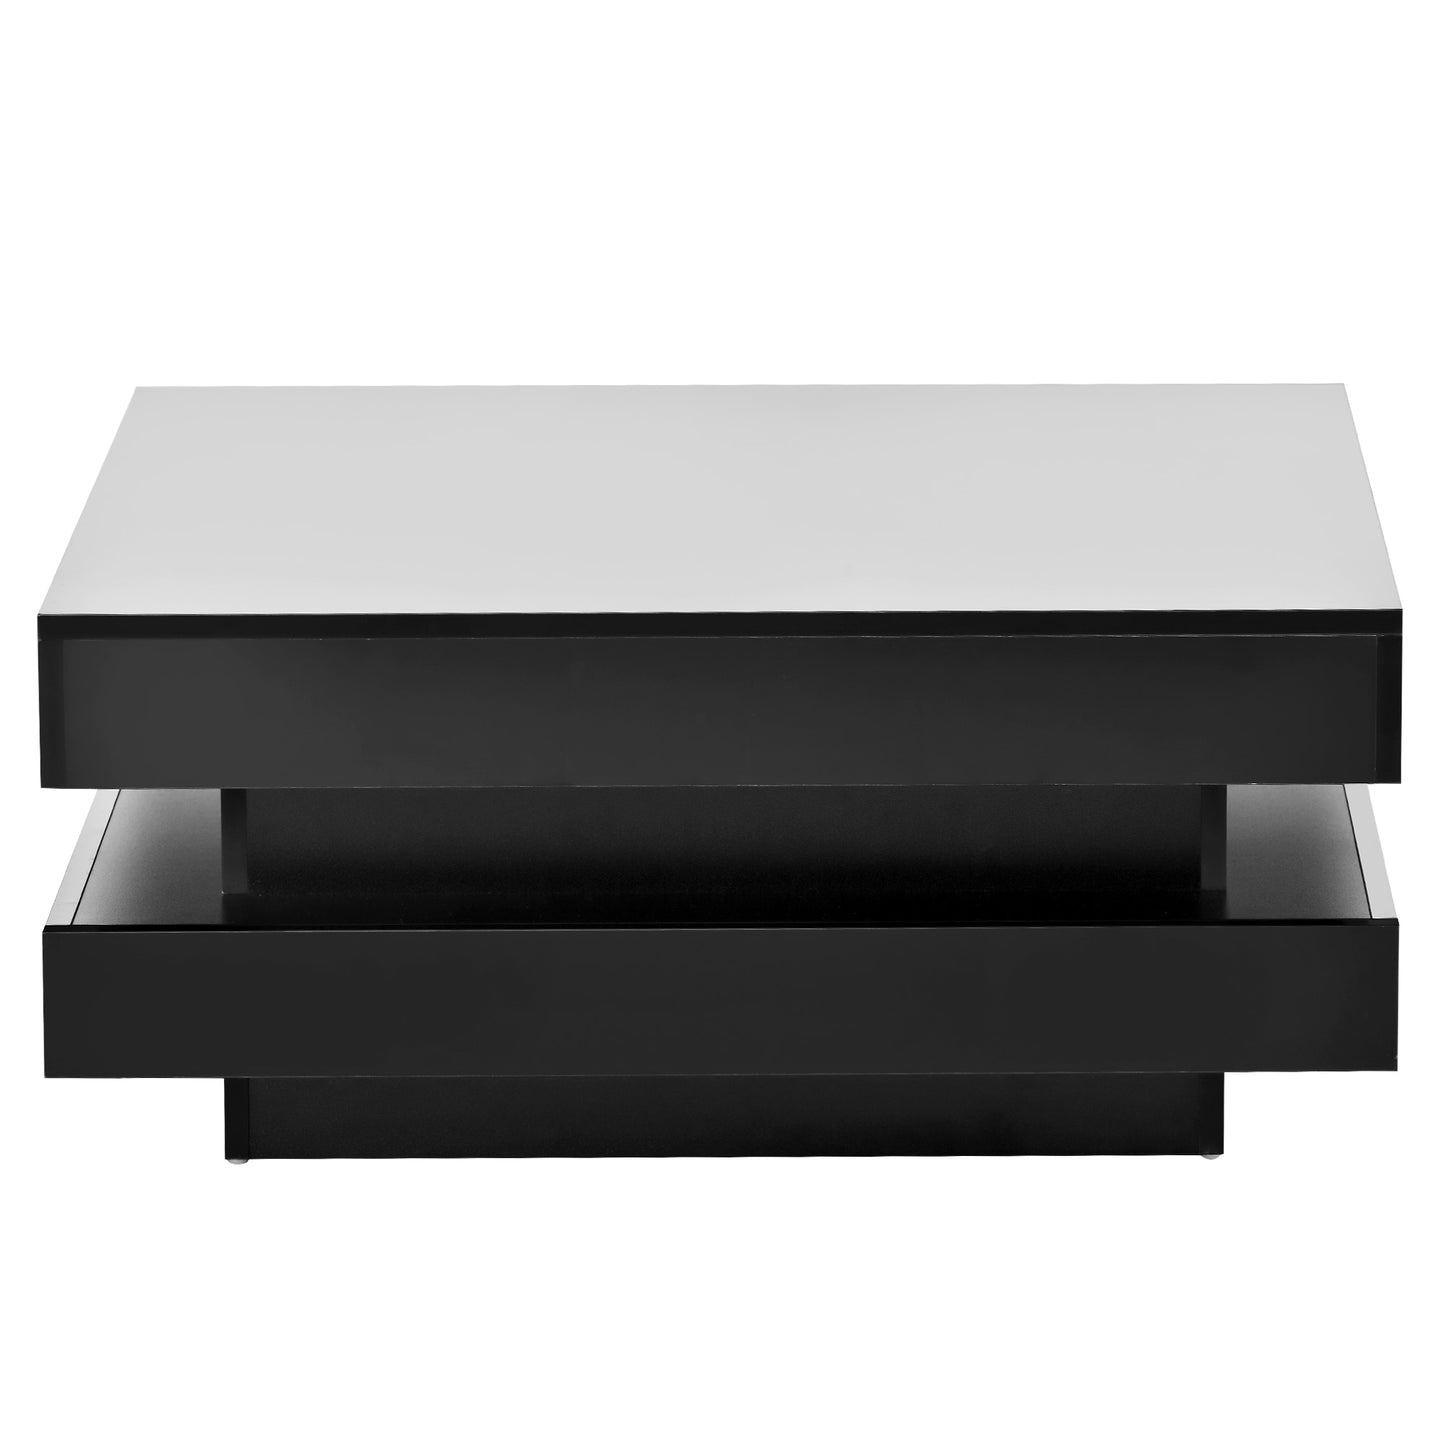 High Gloss Minimalist Design Coffee Table W/Plug-in 16-Color LED Lights 2-Tier Square Center Table for Living Room